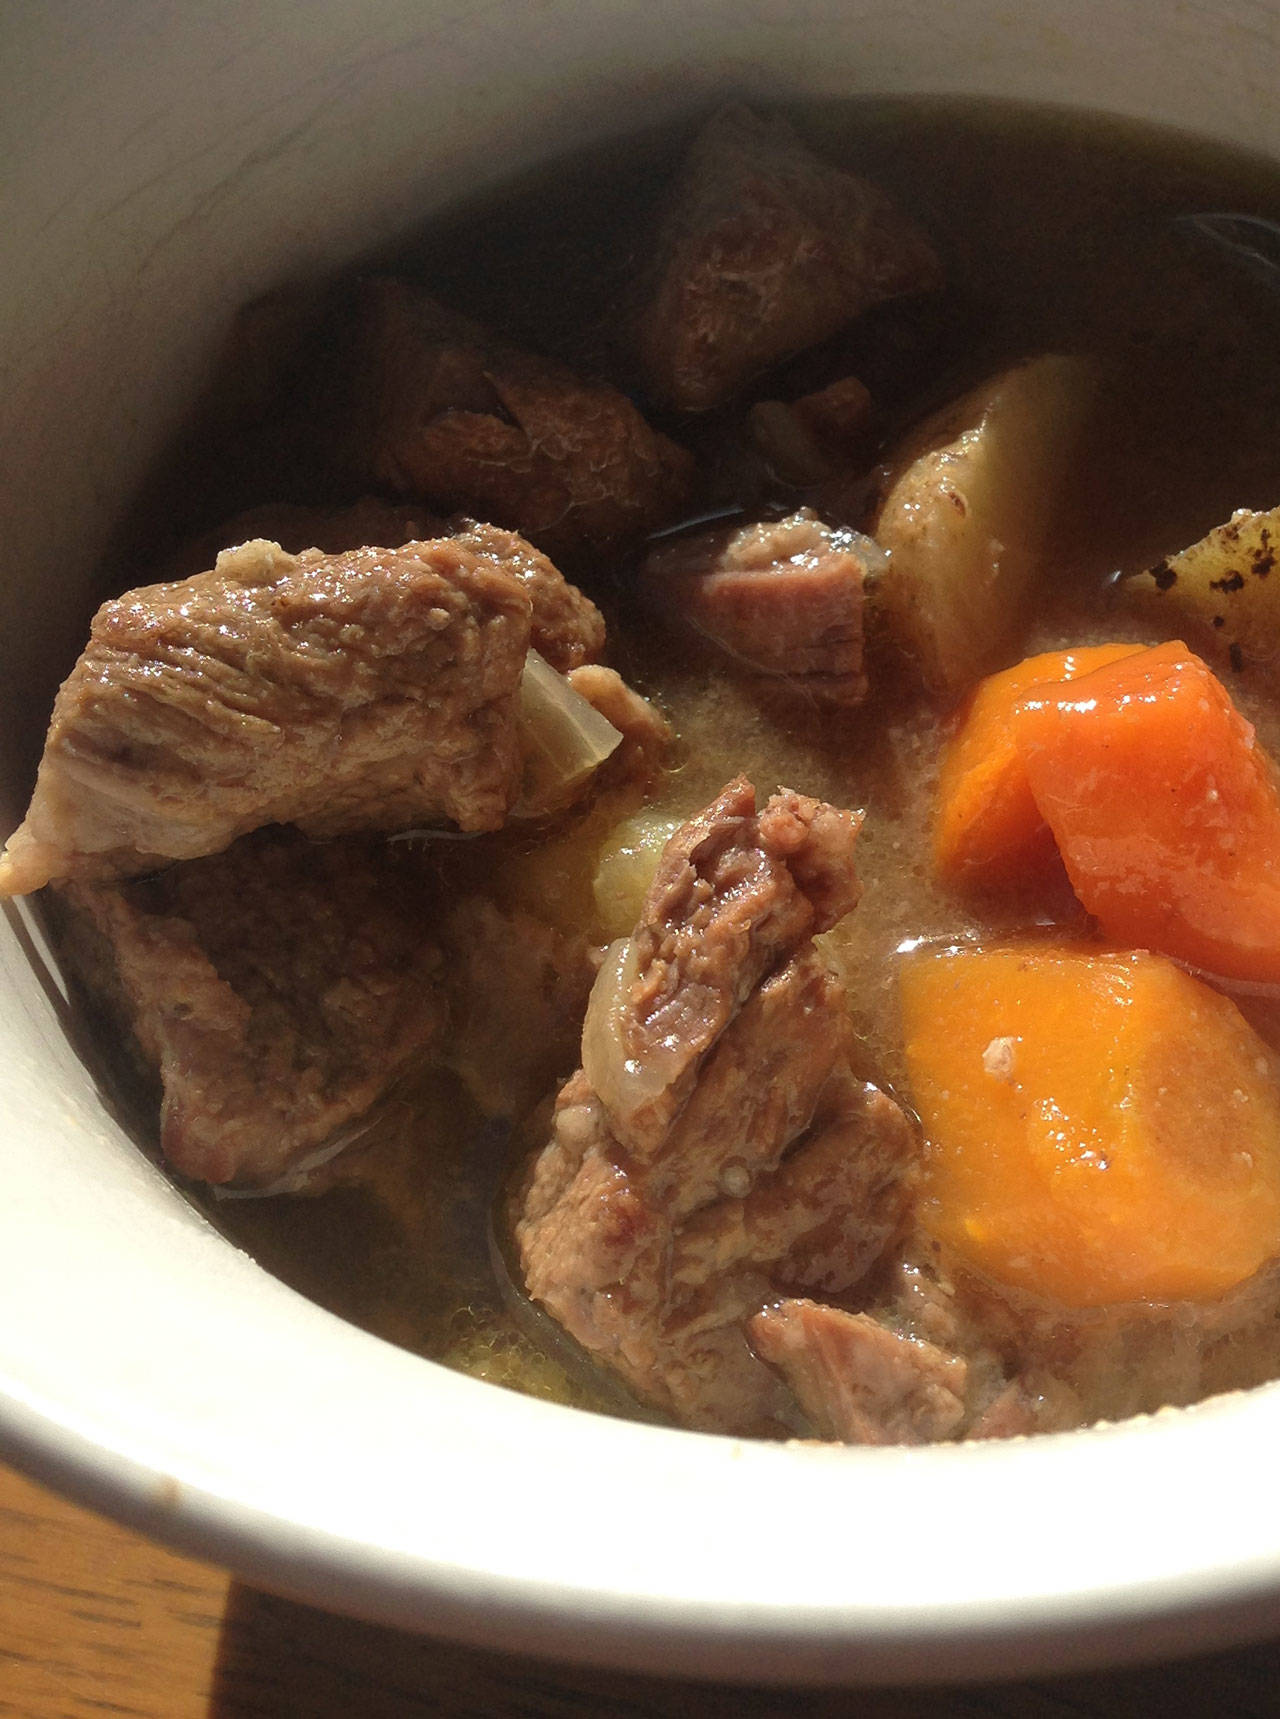 Beef stew awaits eating. (Carrie Sanford/for Peninsula Daily News)